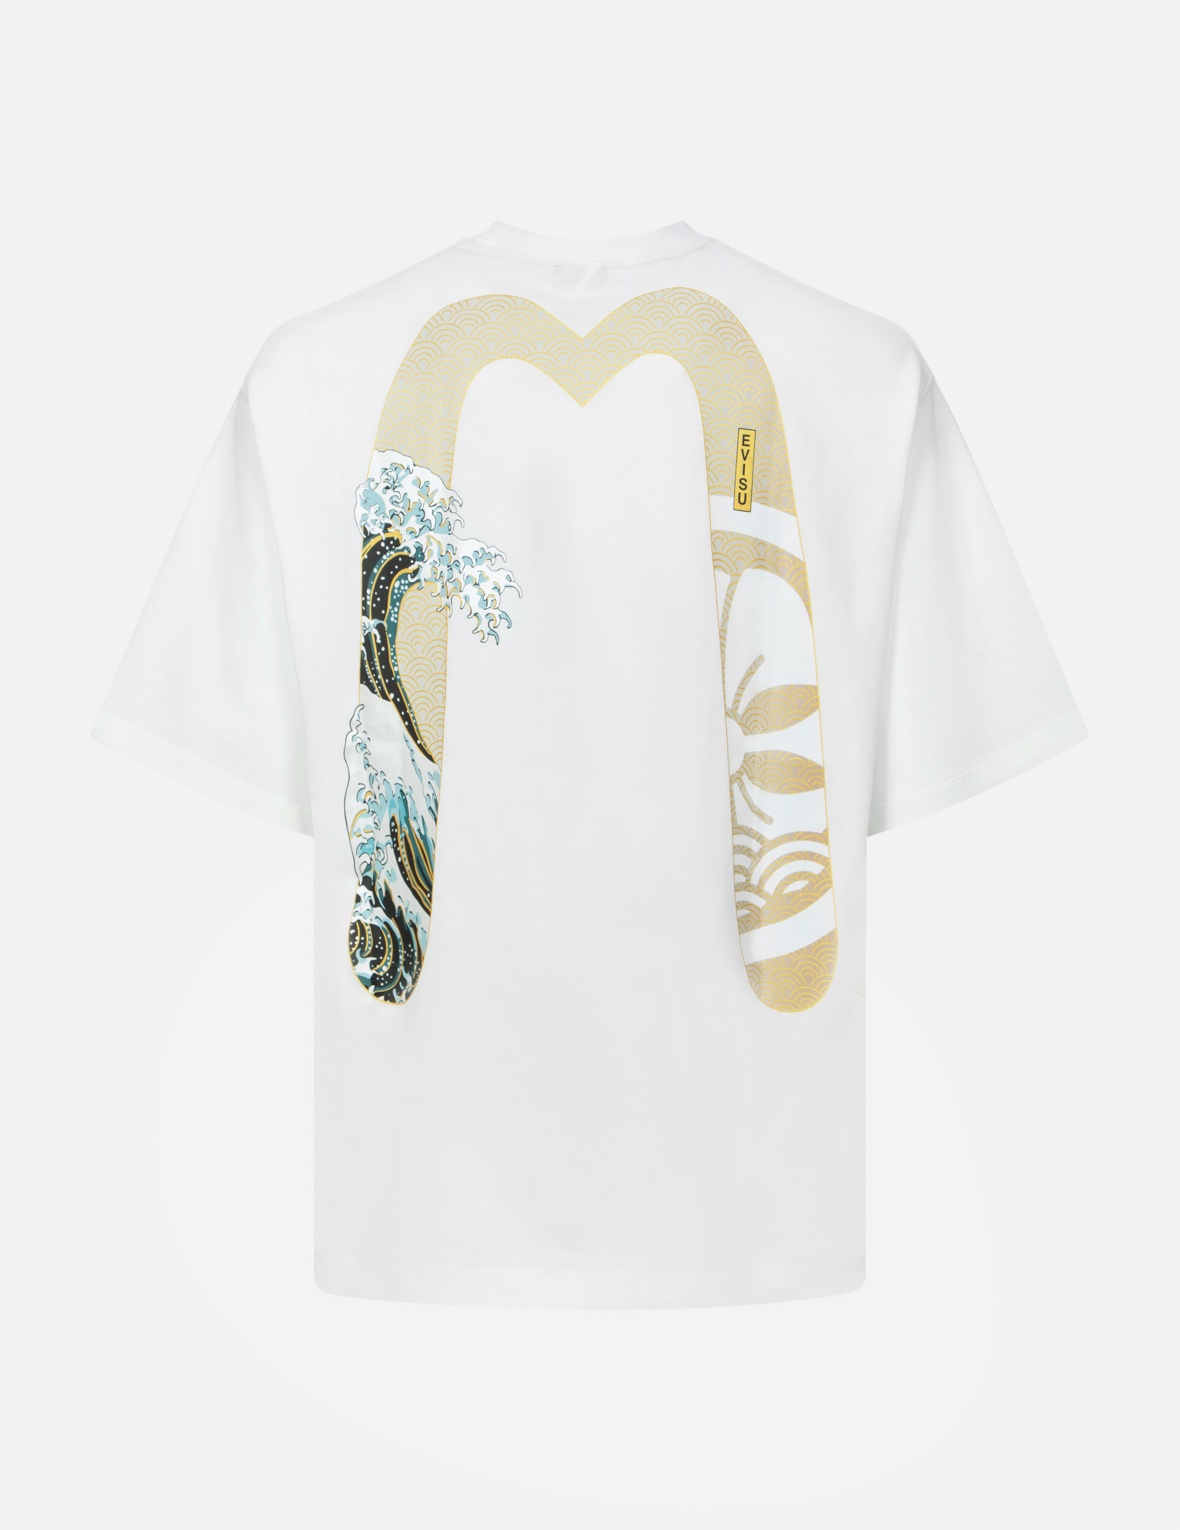 KAMON AND THE GREAT WAVE DAICOCK PRINT RELAX FIT T-SHIRT - 2